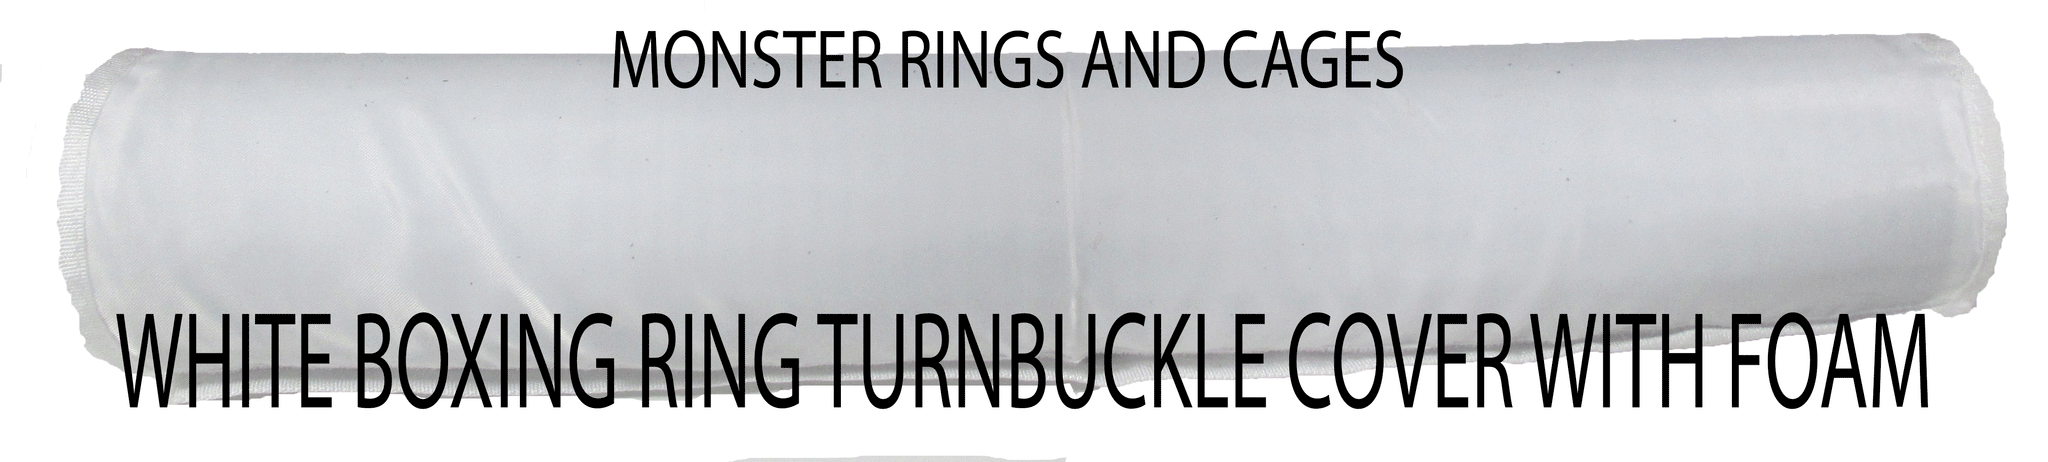 White turnbuckle covers are available from Monster Rings and Cages